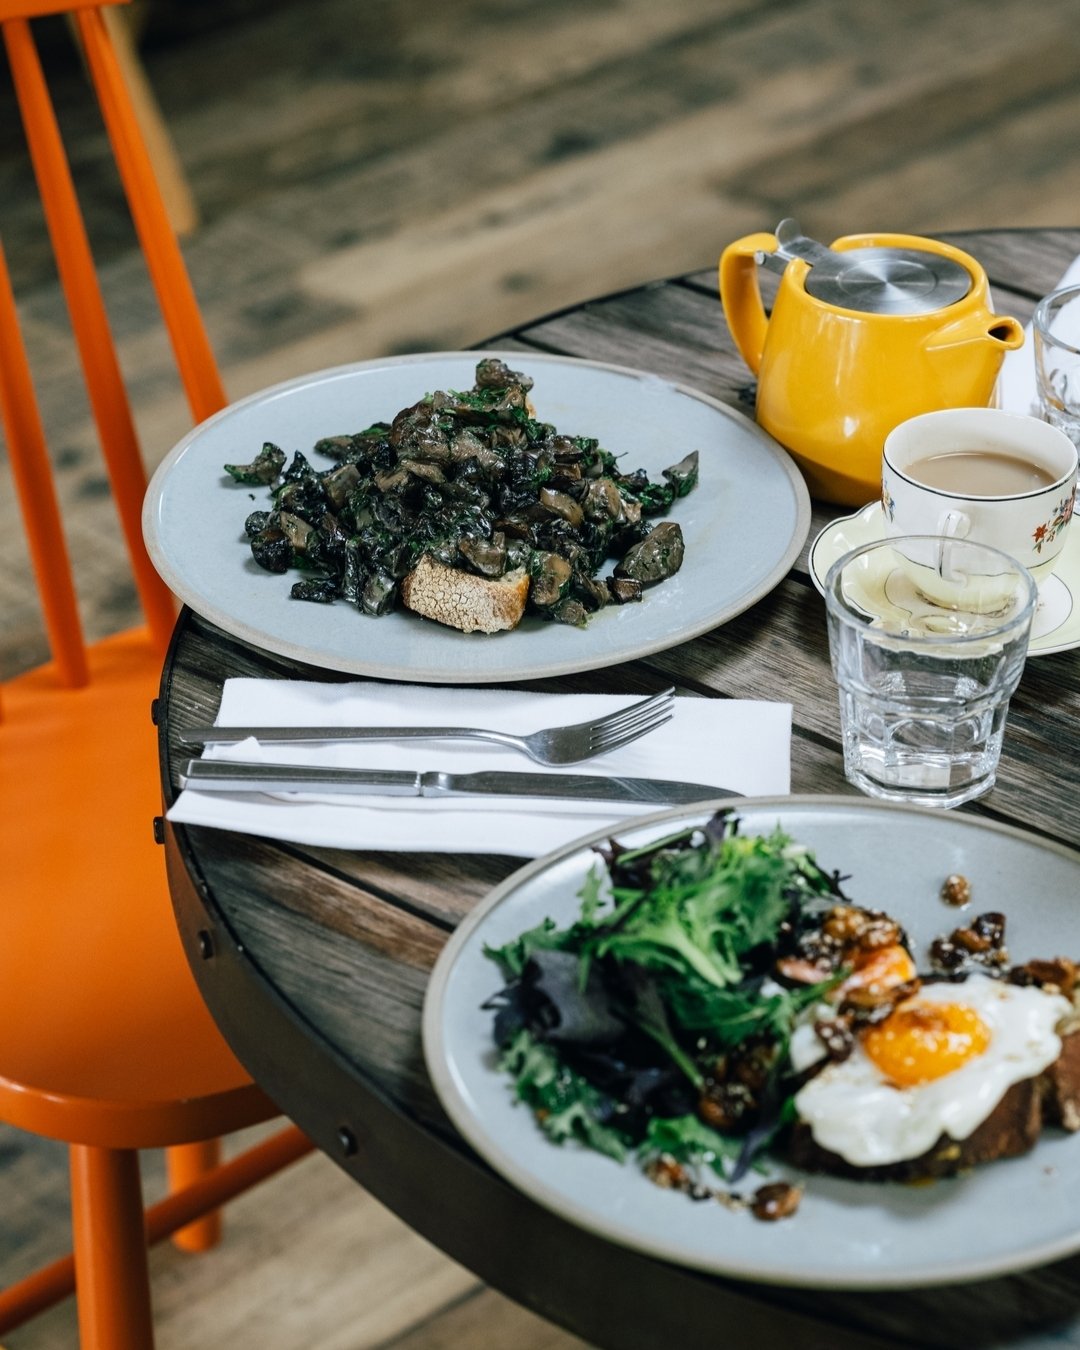 No matter what you order at Soulshine, you're supporting a handful of local producers with each and every plate. We get our mushrooms from @grownupmushrooms, our bread from @thewobblycottage, our eggs from Stoney Farm, lettuce from @tamarisk_farm, th